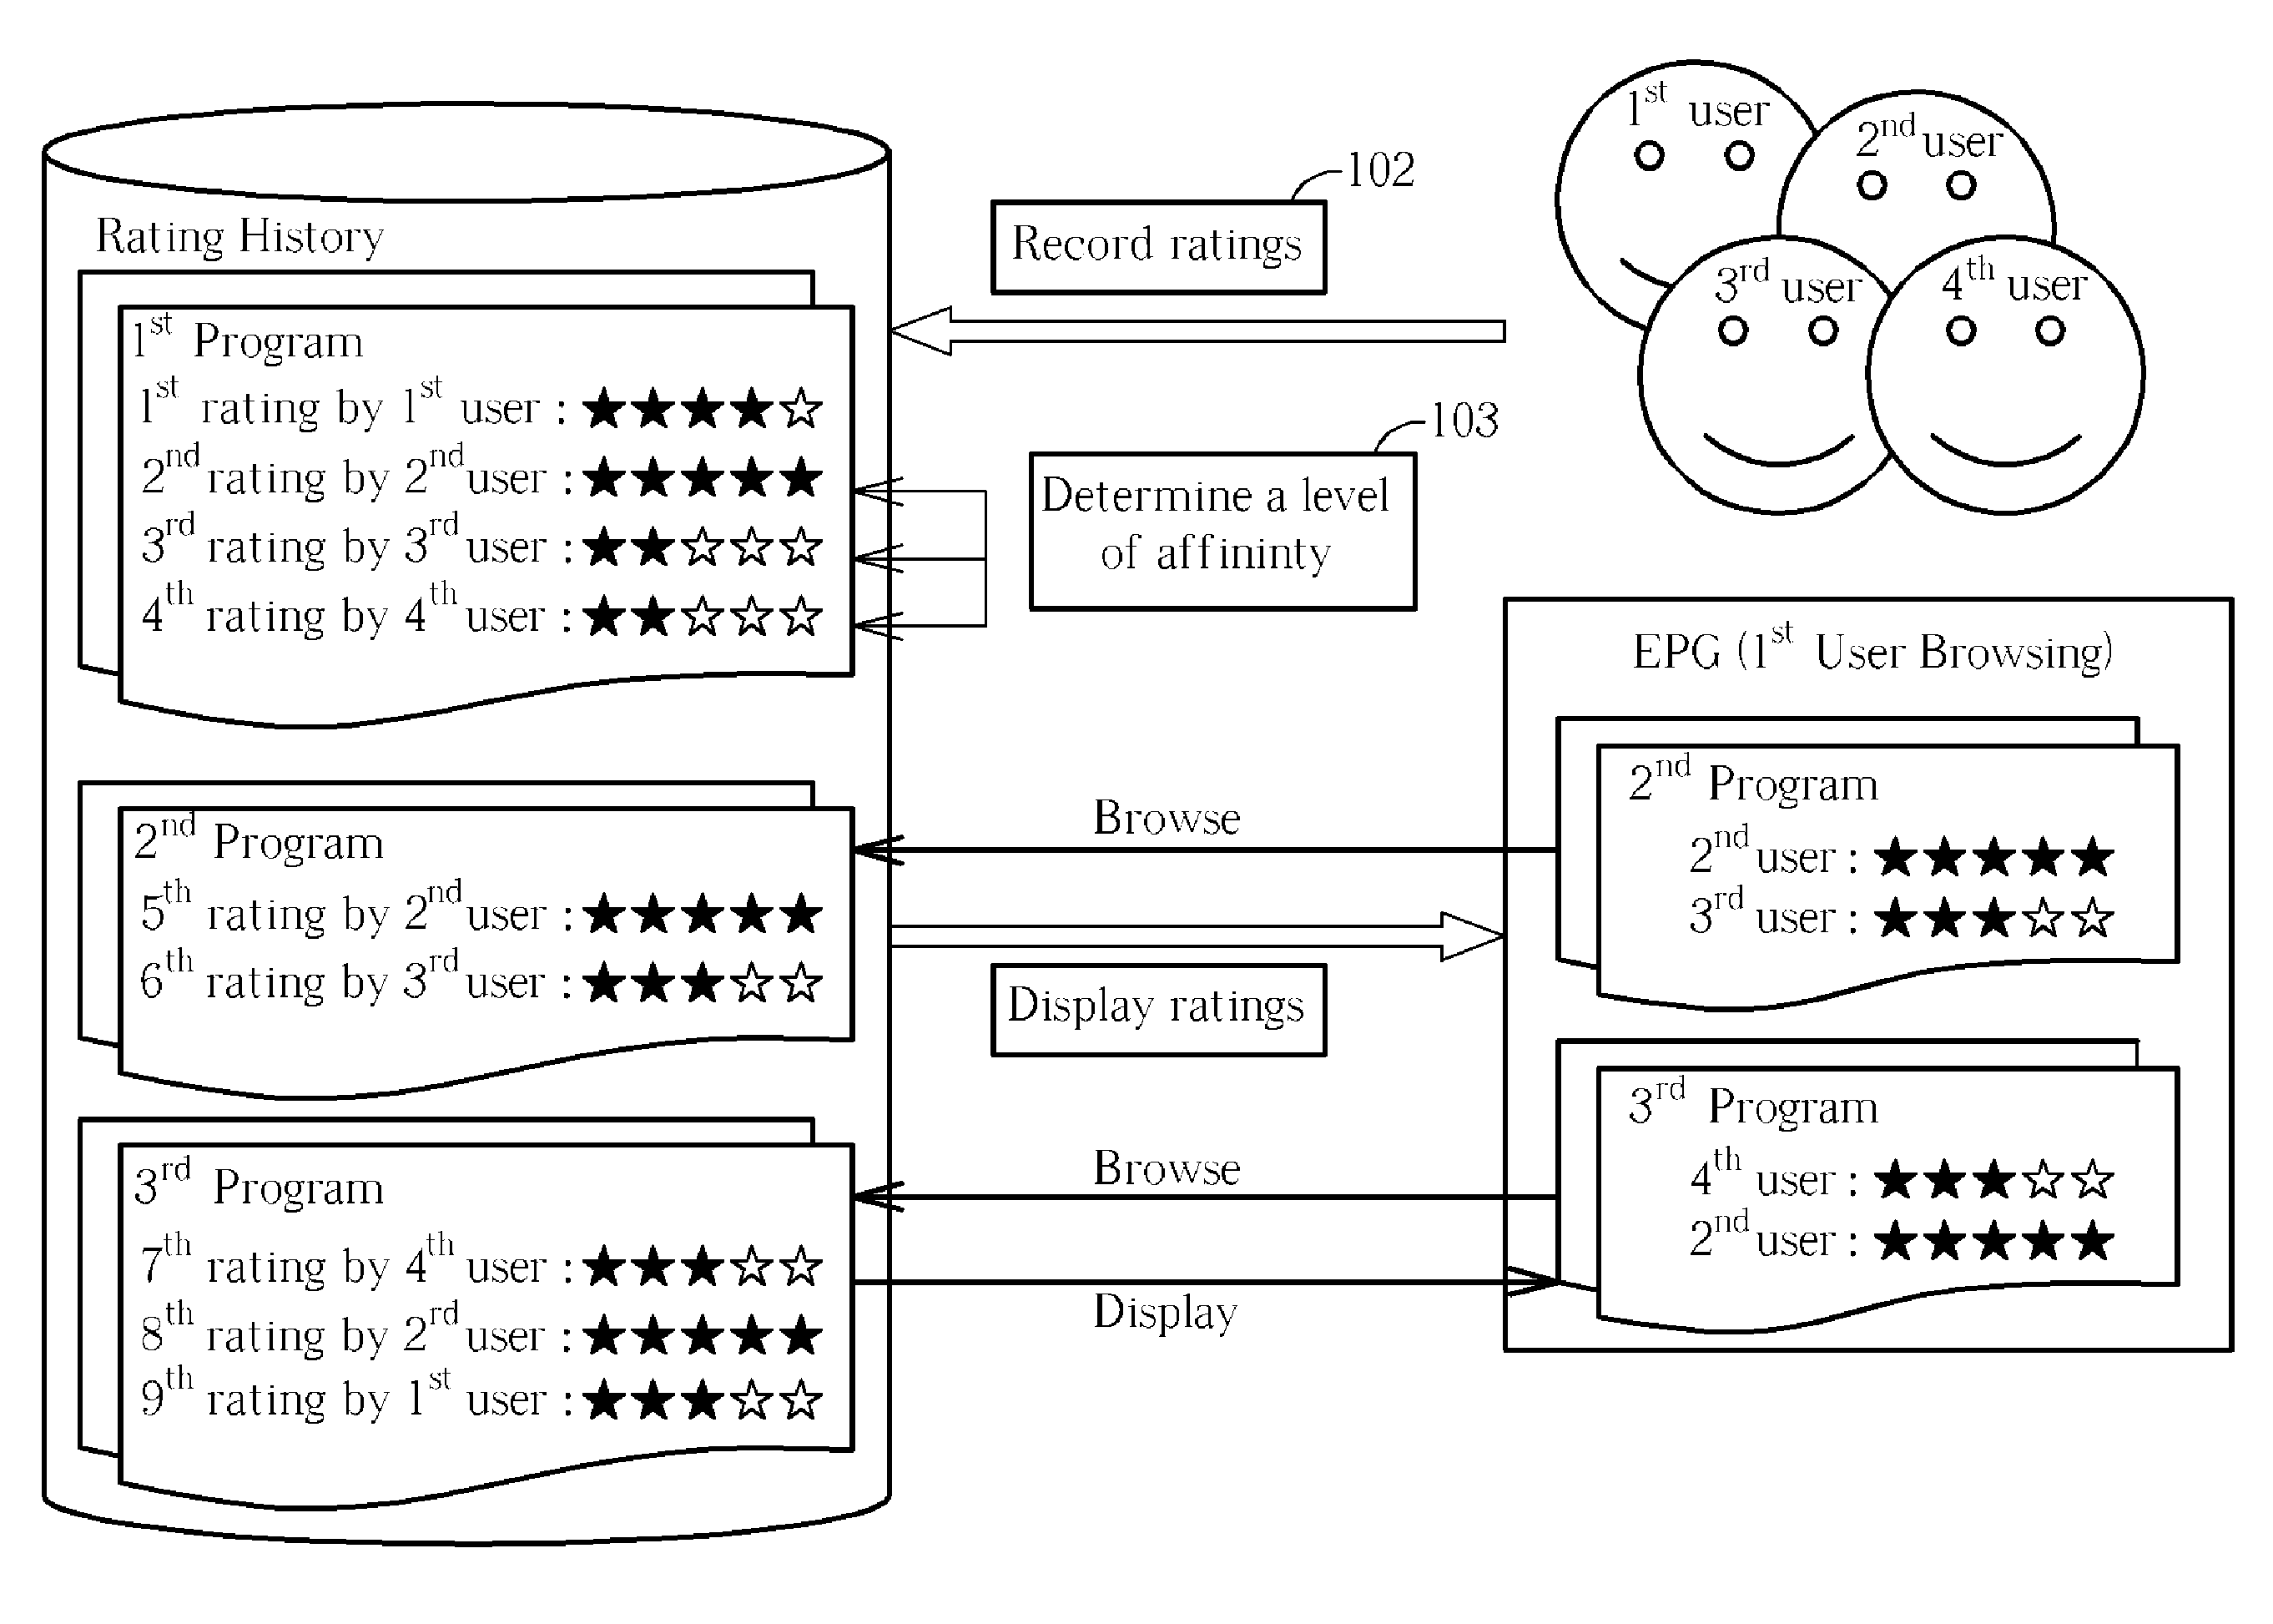 Method for displaying search results in a browser interface